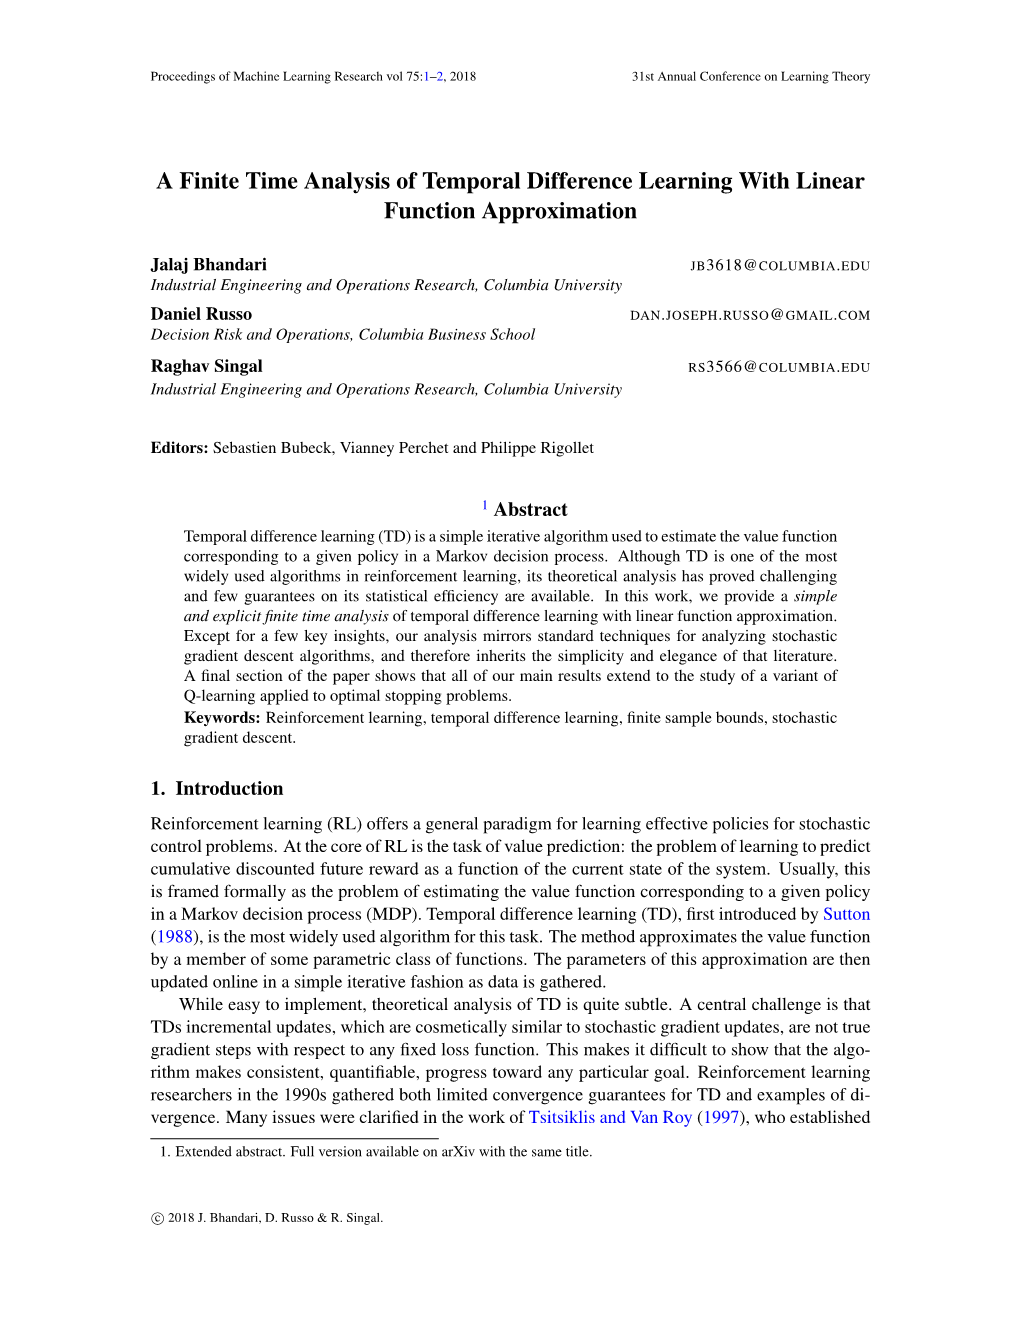 A Finite Time Analysis of Temporal Difference Learning with Linear Function Approximation